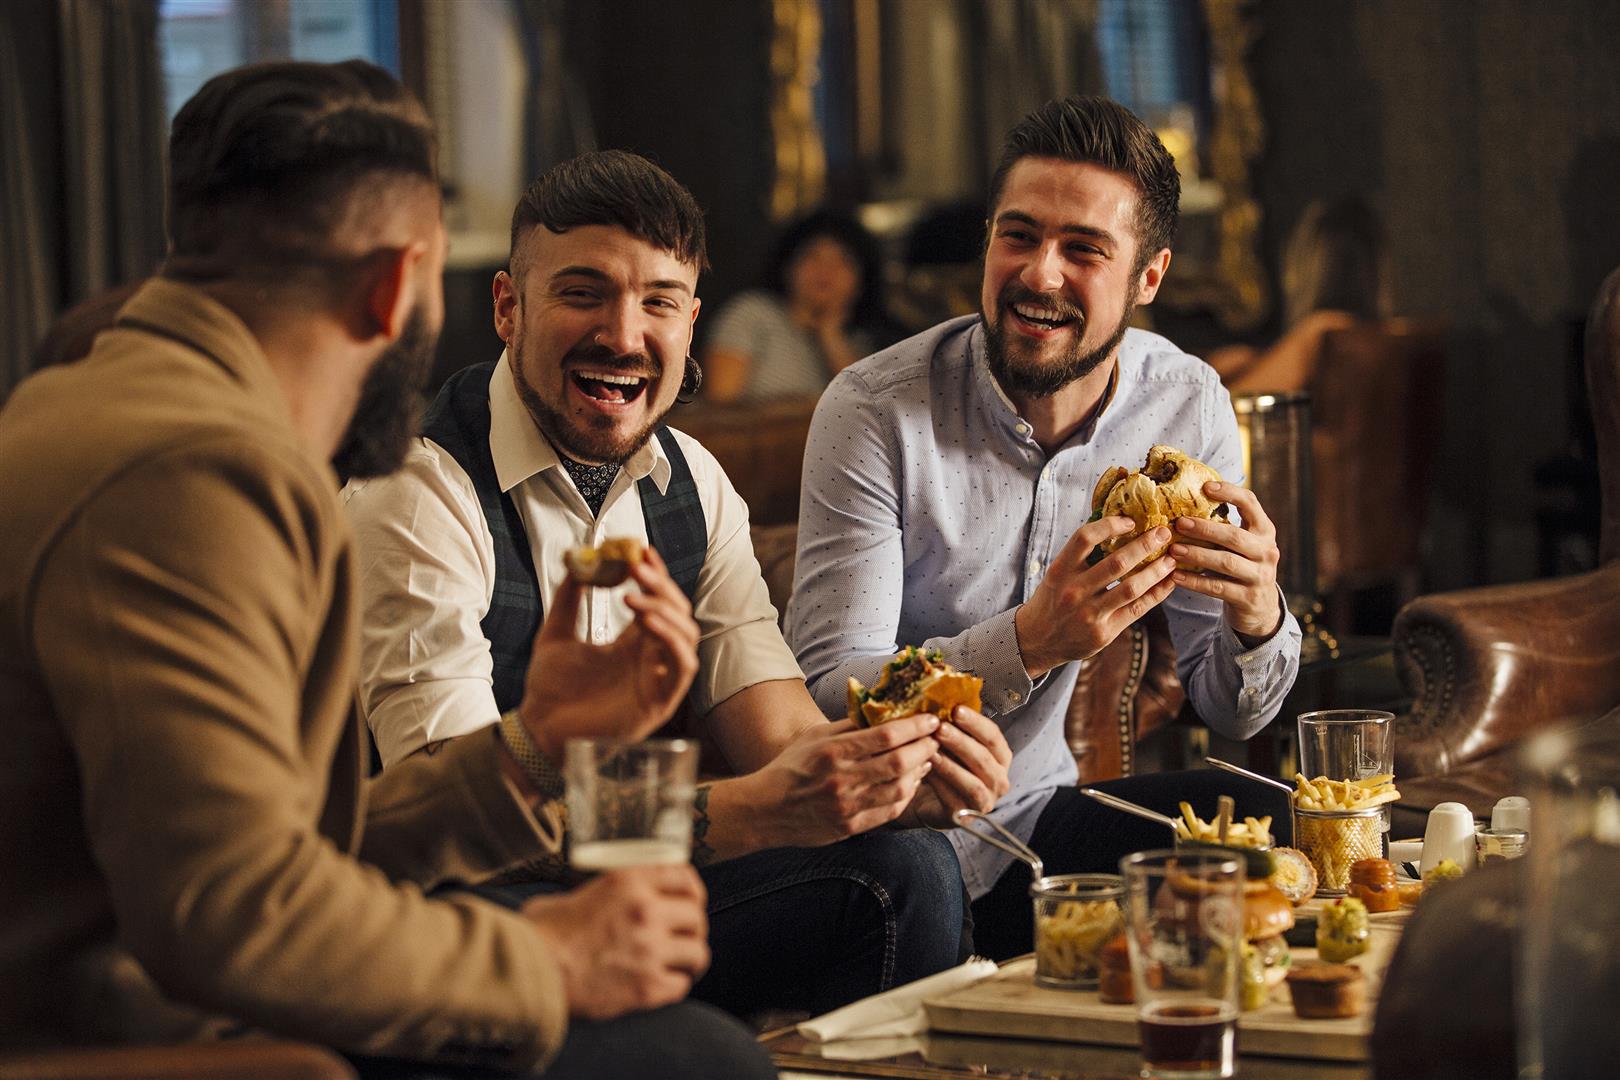 Three men are sitting together in a bar/restaurant lounge. They are laughing and talkig while enjoying burgers and beer.